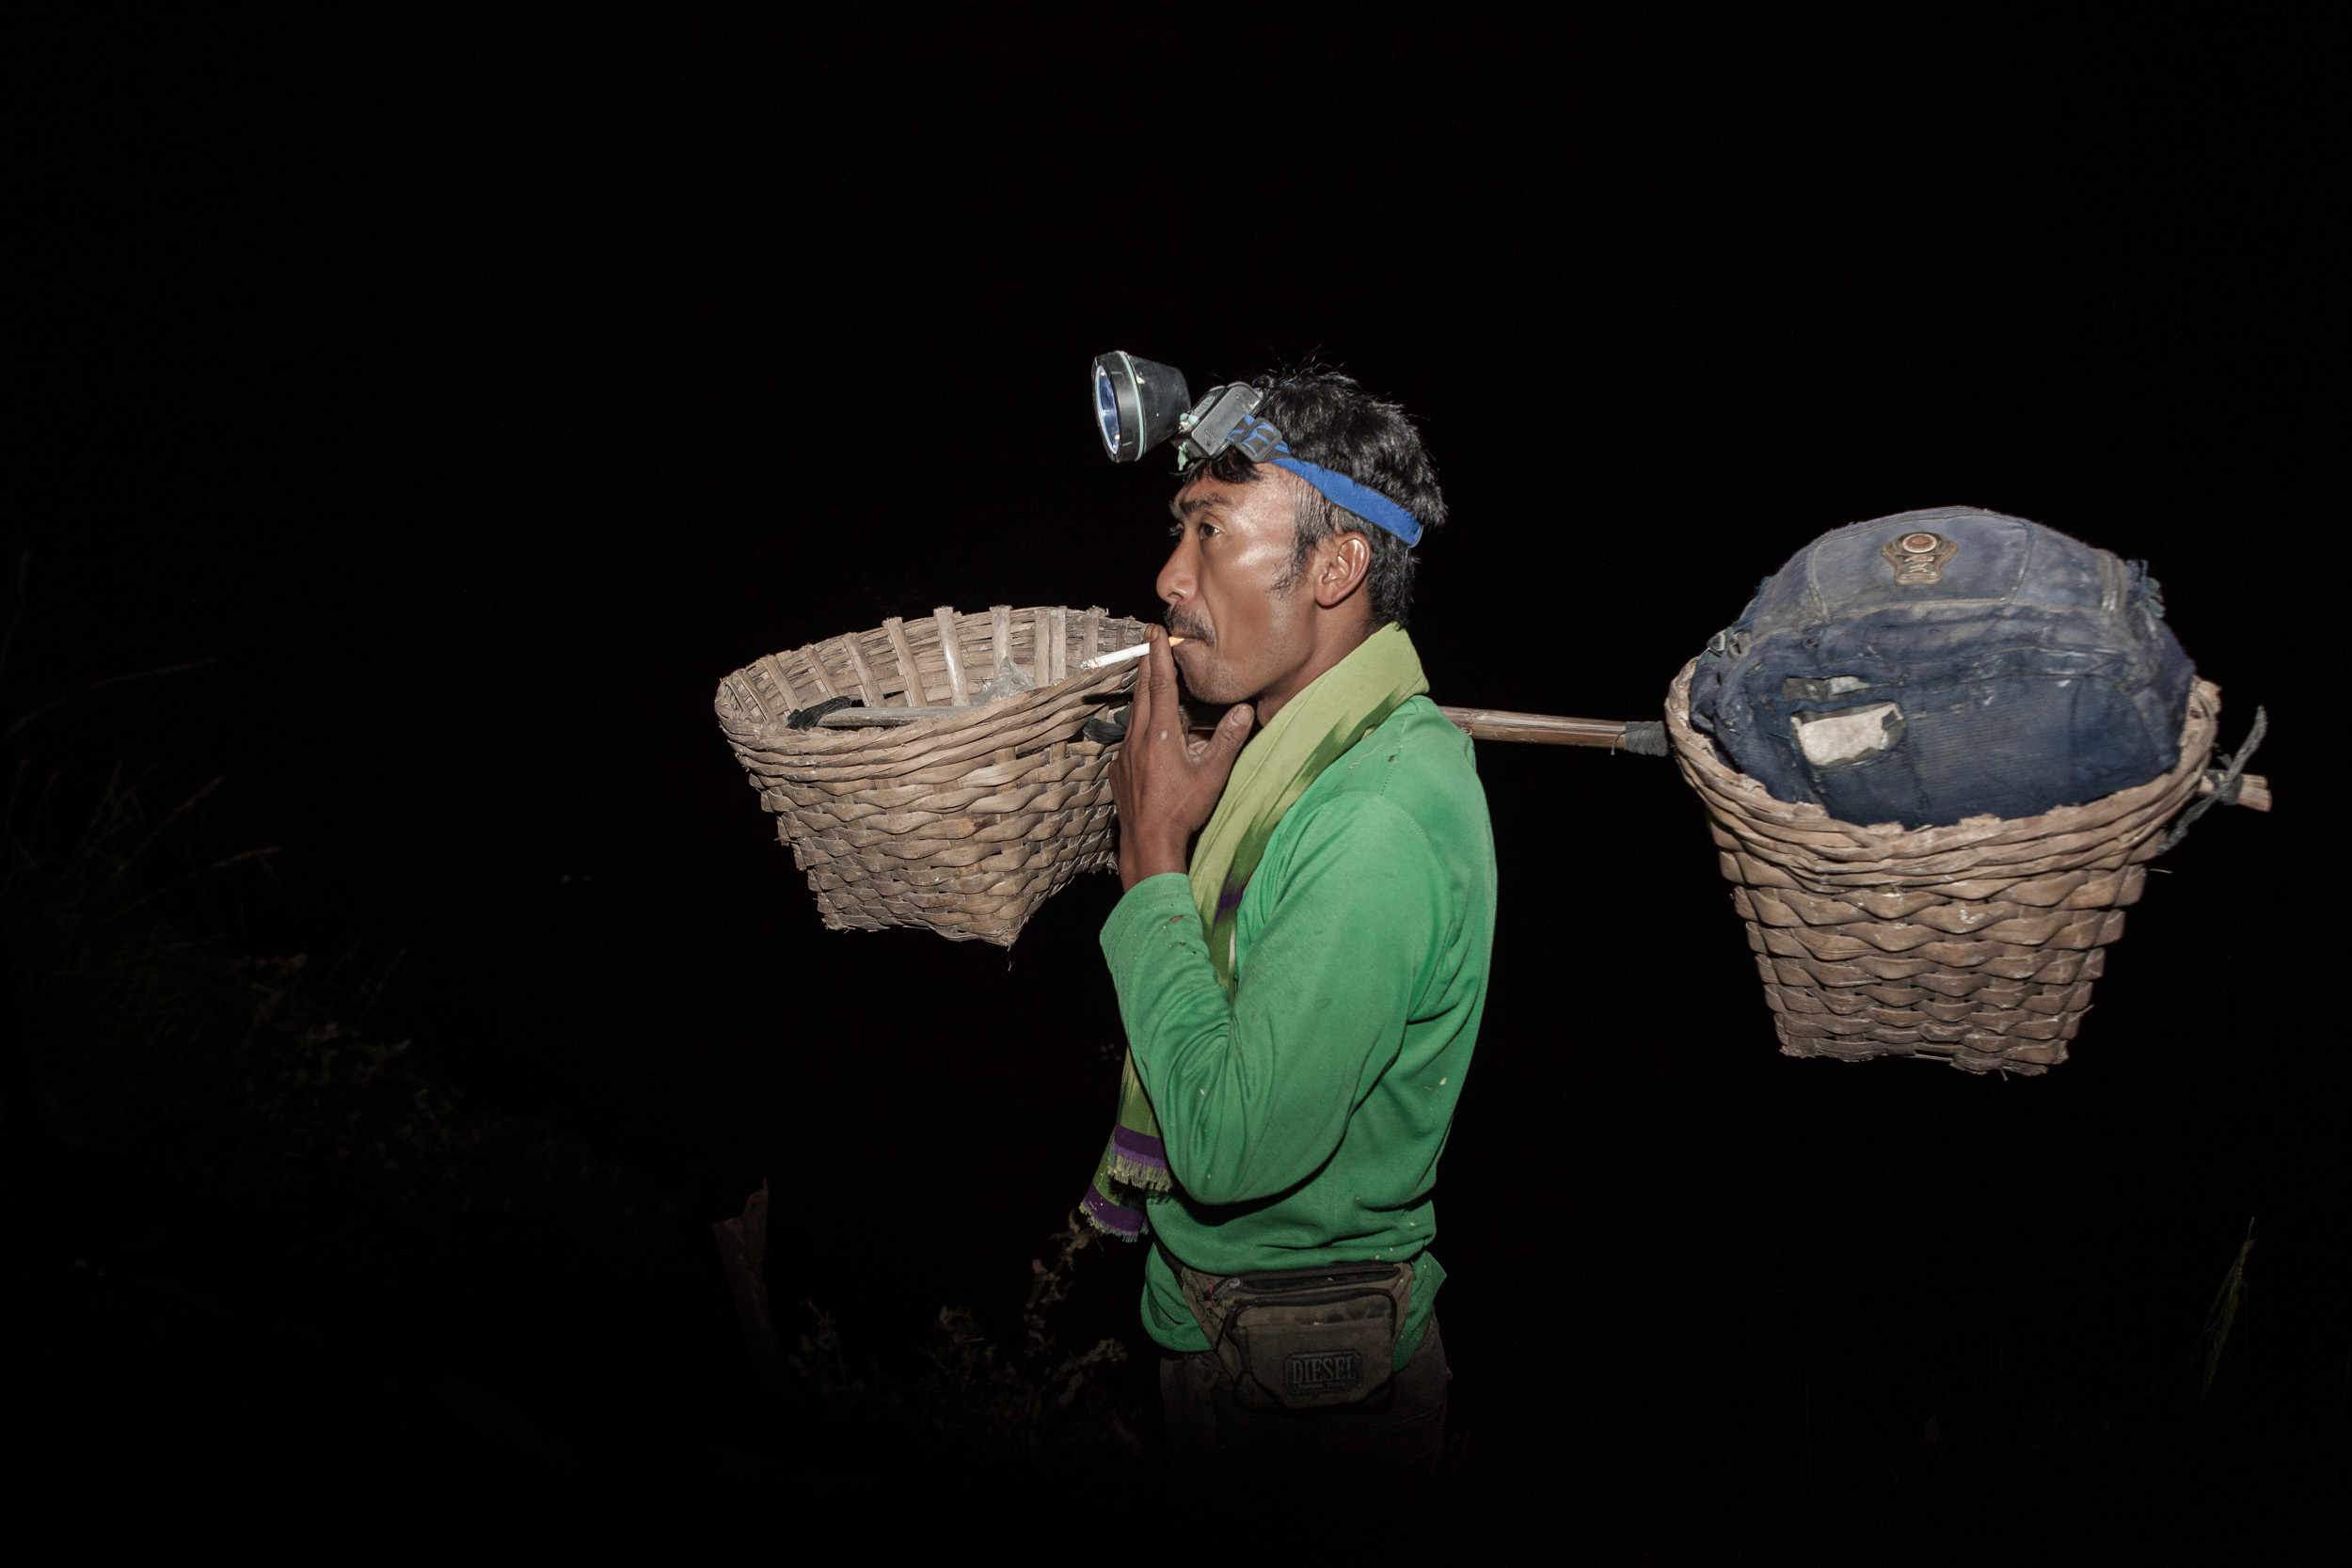 The miners trek to the crater at night. It takes them over an hour to reach the summit of the volcano, then another hour to descend inside the crater, where they mine sulfur.